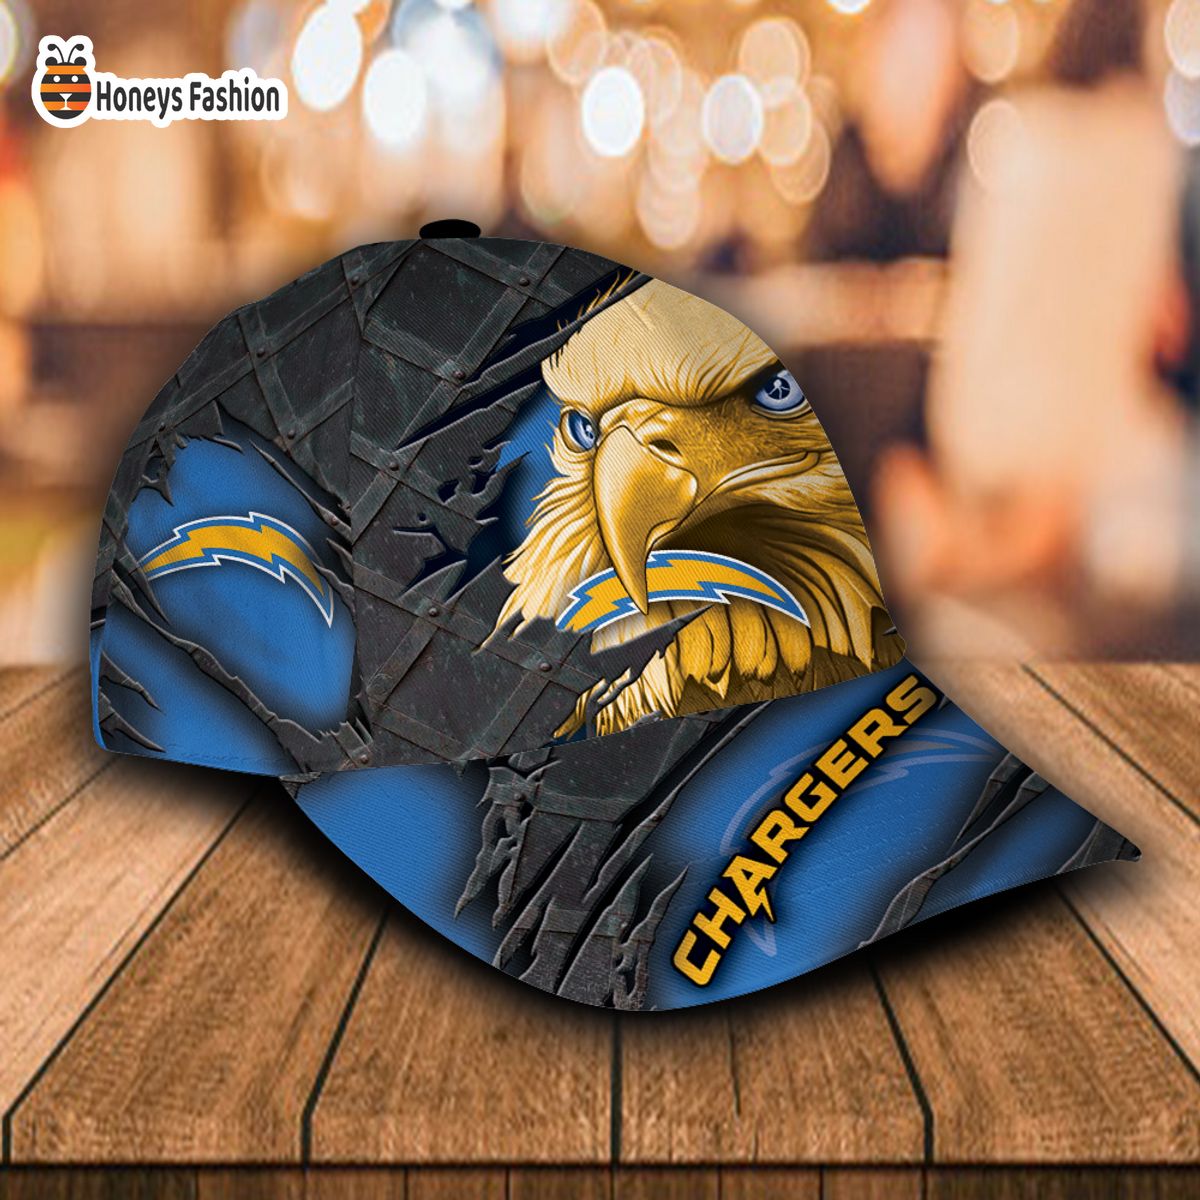 Los Angeles Chargers NFL Eagle Custom Name Classic Cap